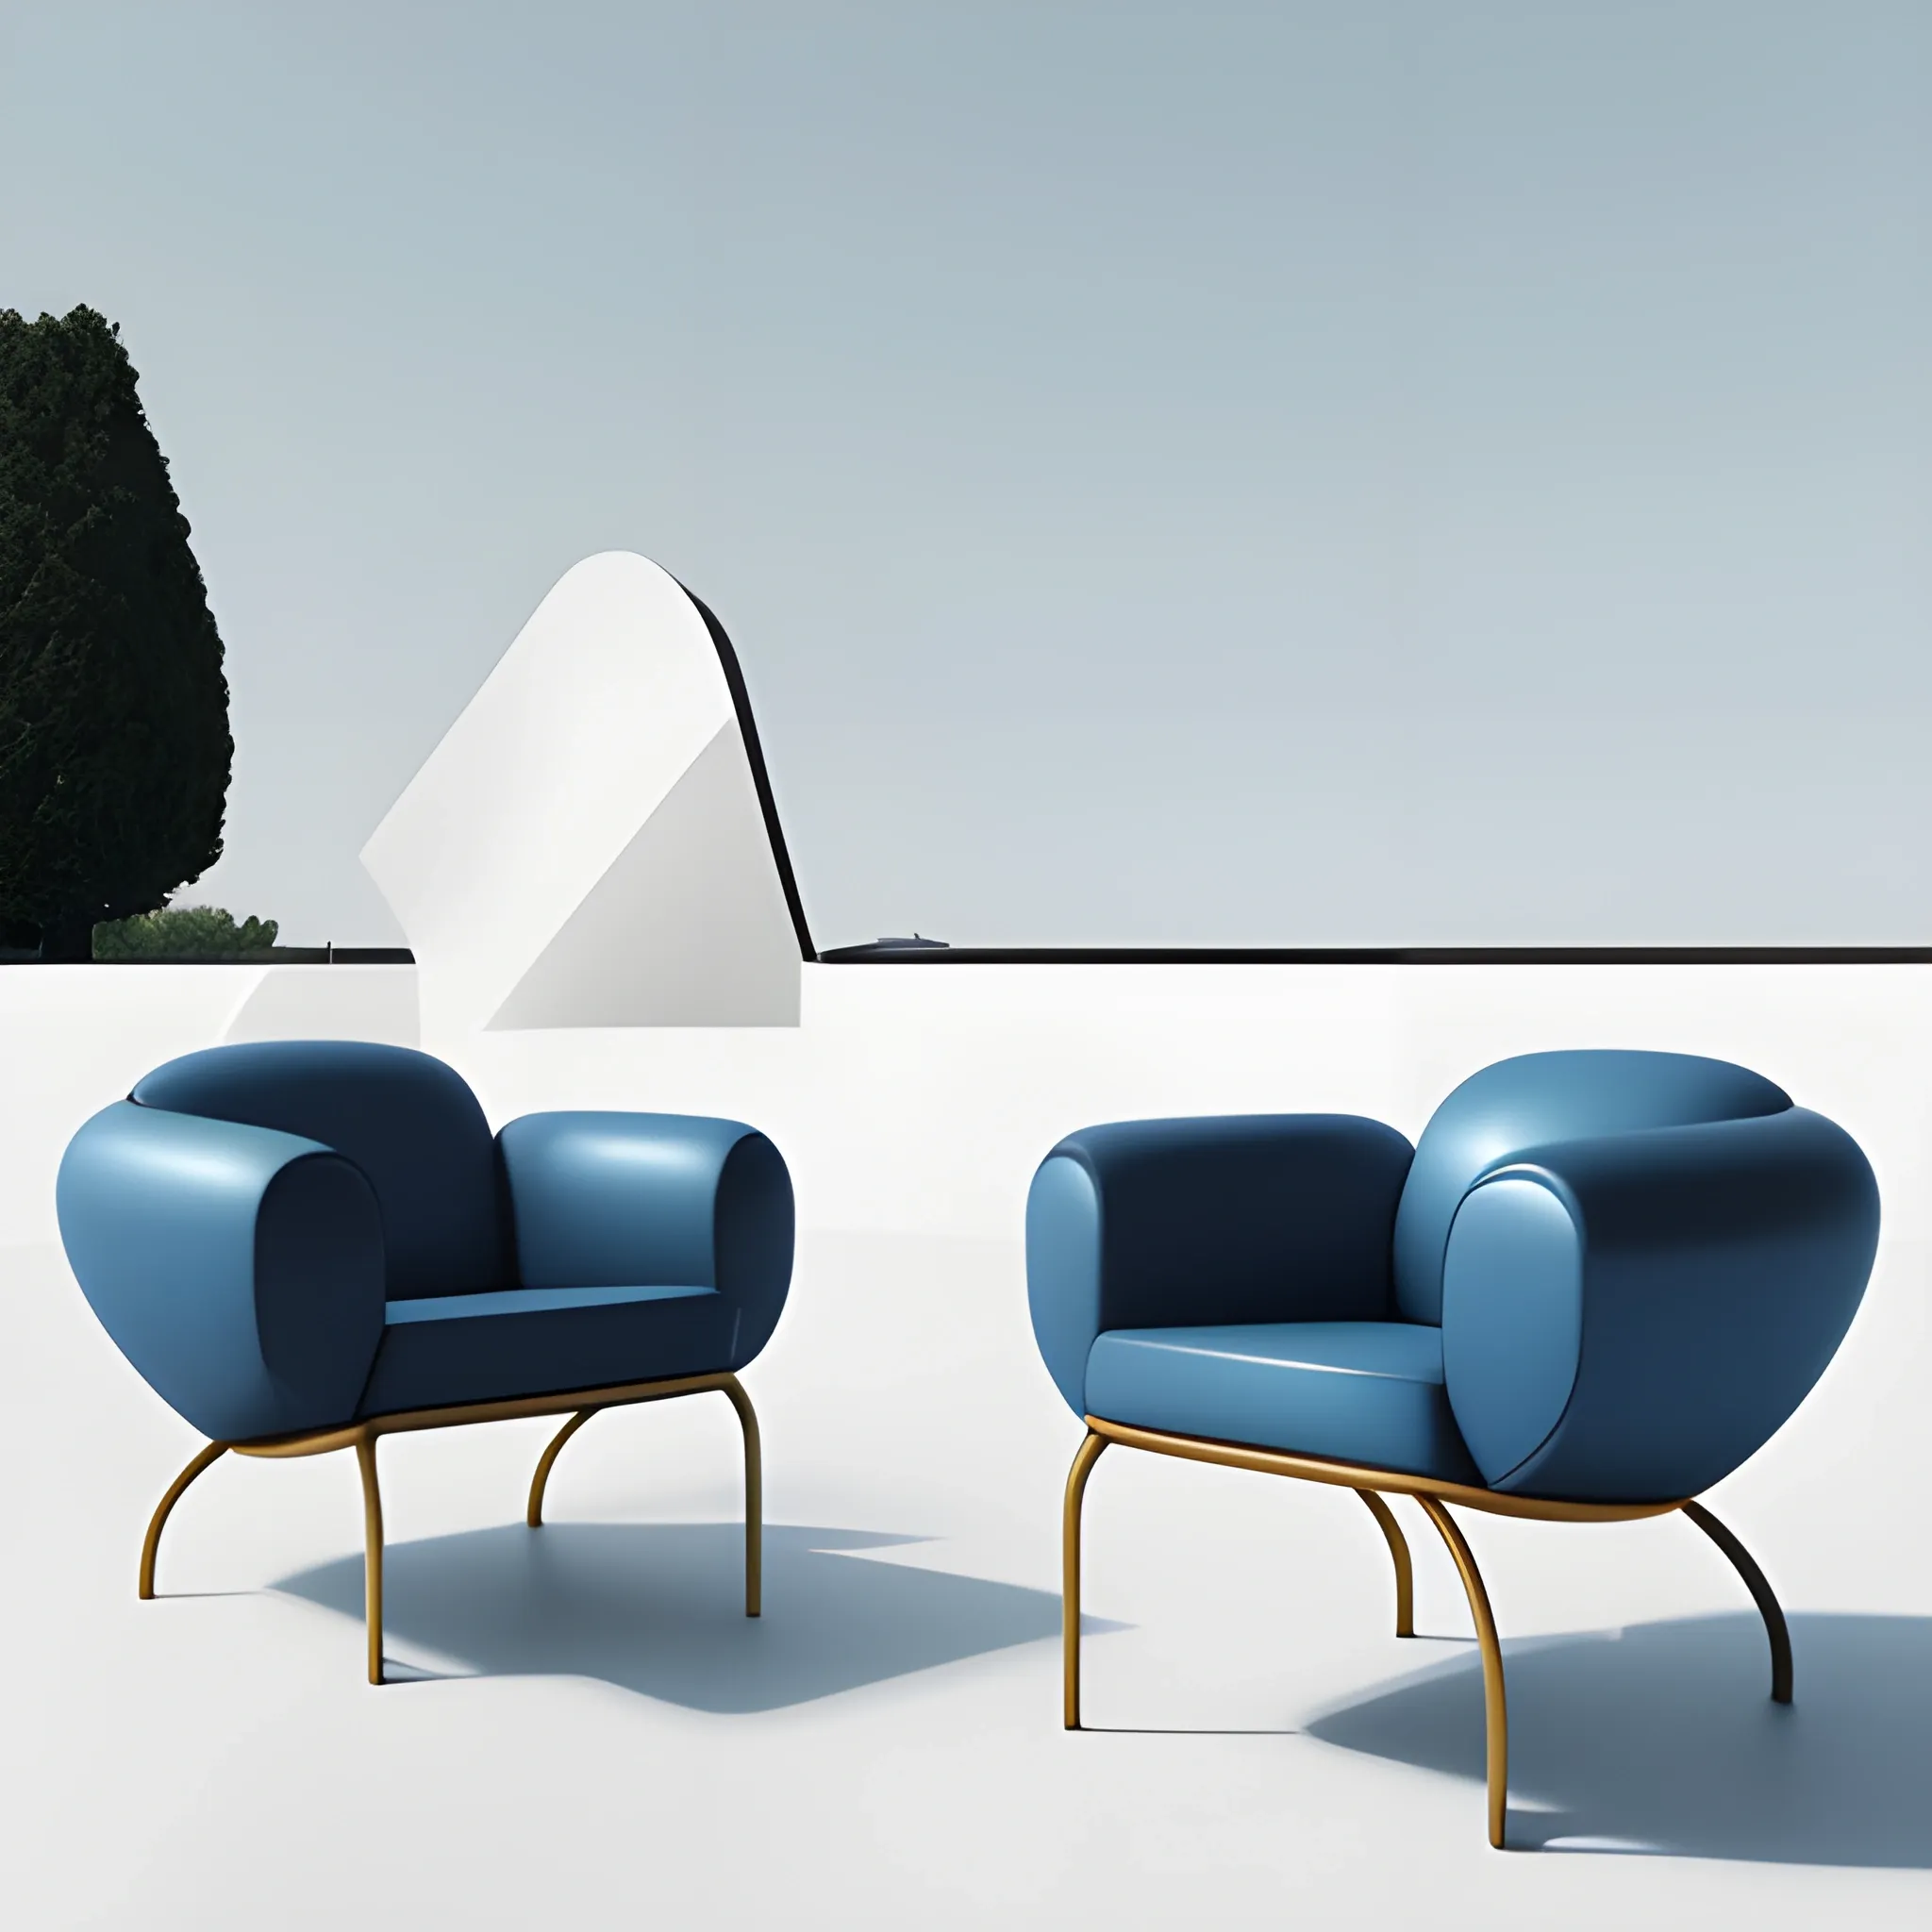 Create a monumental modern sculptured  one italian CHAIR in Claes Oldenburg style, simple design as Bahaus style, minimal, geometric simplicity, Bronce material surface and , asymetric composition , blue sky background, pretty detailed HD render, classic base, fountain, 3D, 